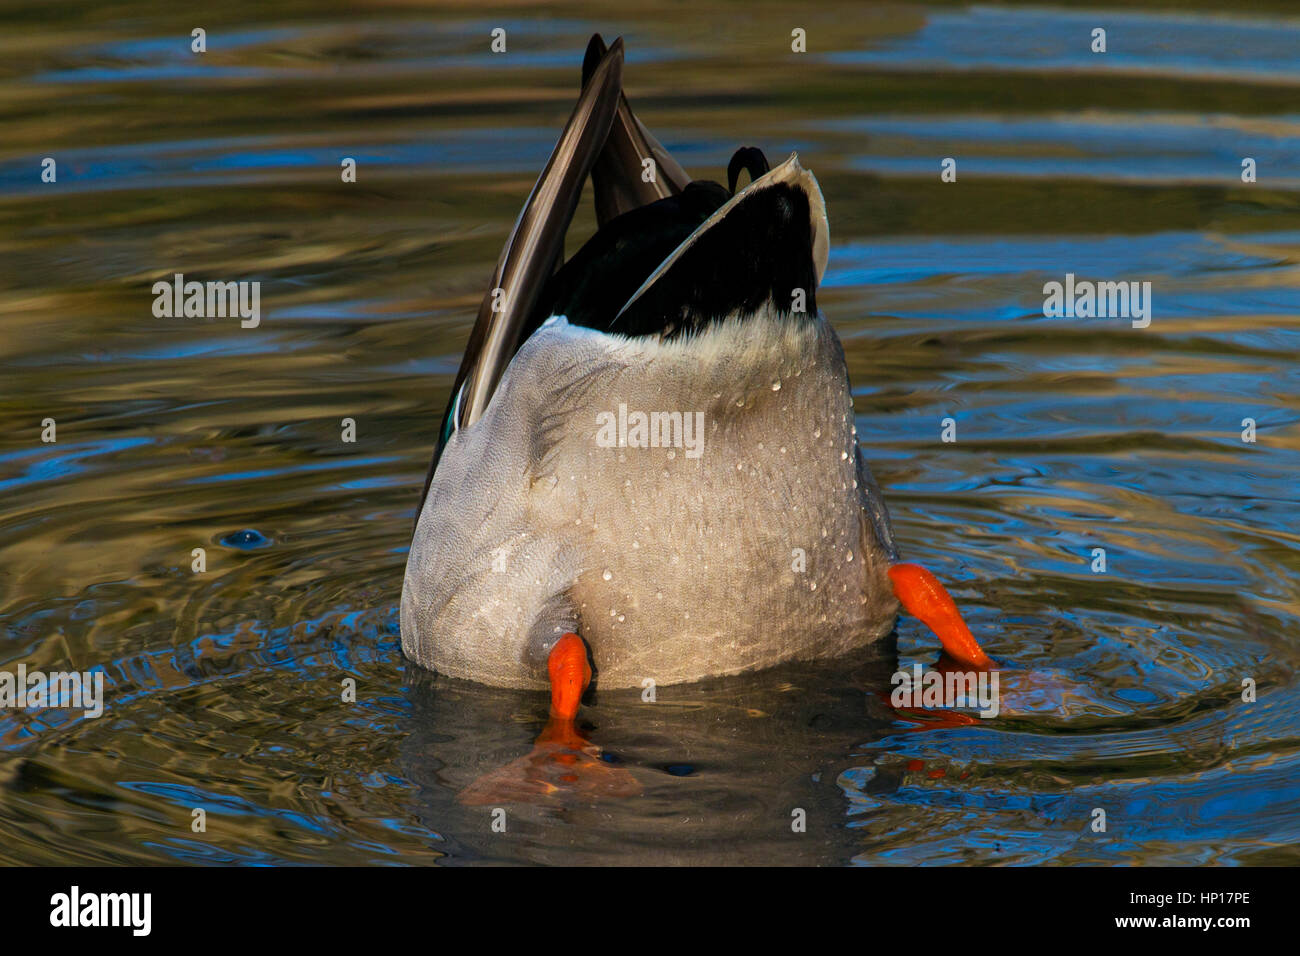 Duck with head under water its bottom pointing up showing close up of water droplets on feathers Stock Photo